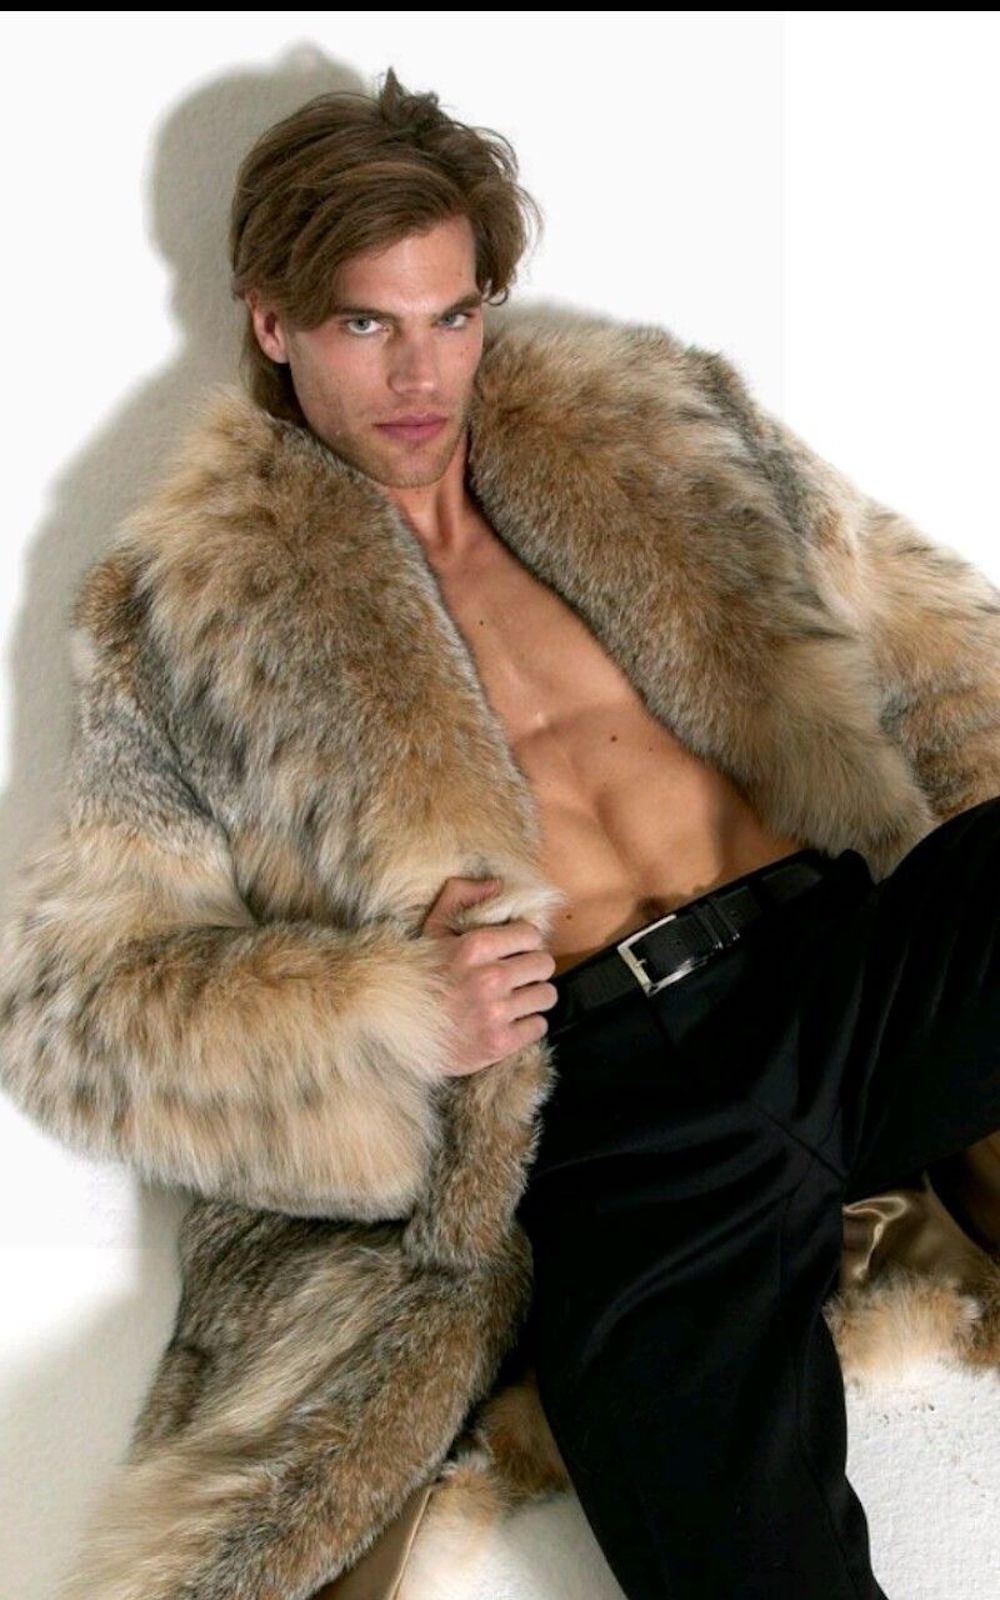 And of course men in fur coats look sexy